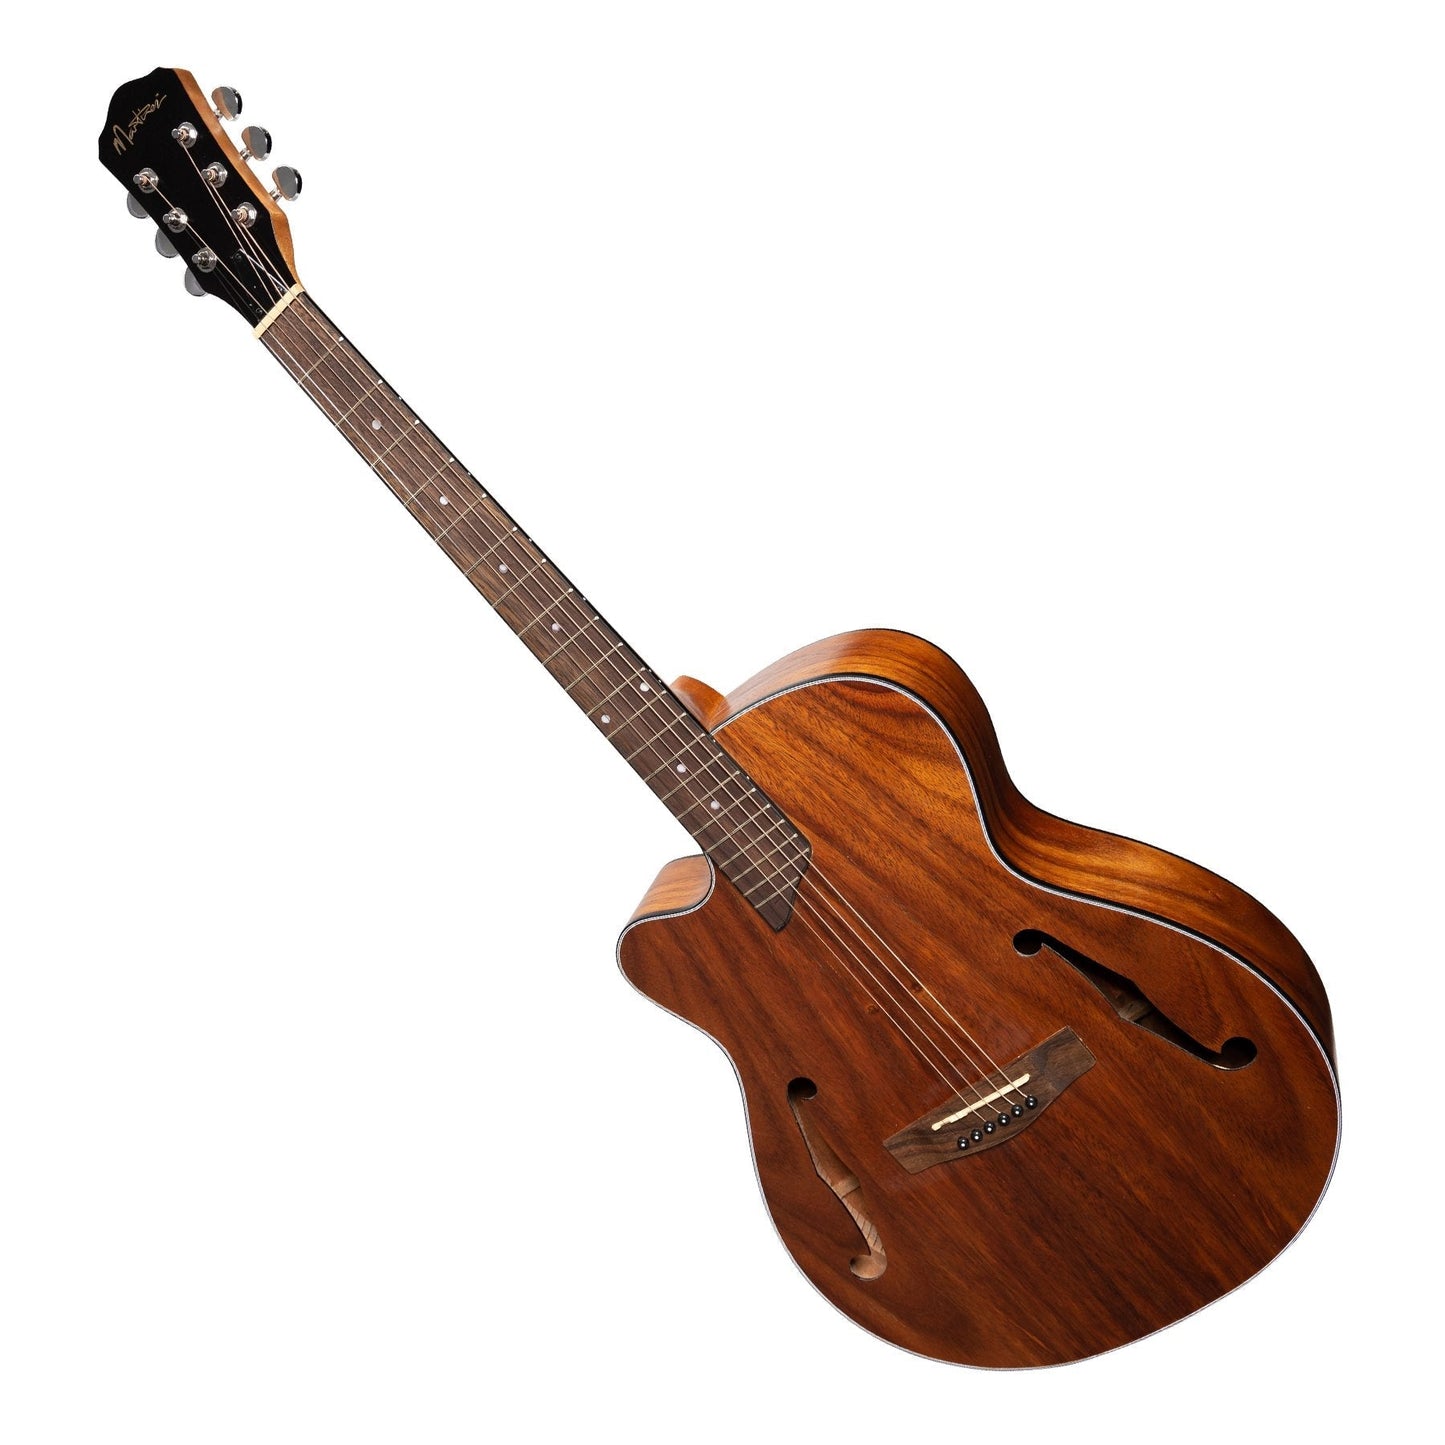 Martinez Left Handed Jazz Hybrid Acoustic-Electric Small Body Cutaway Guitar (Rosewood)